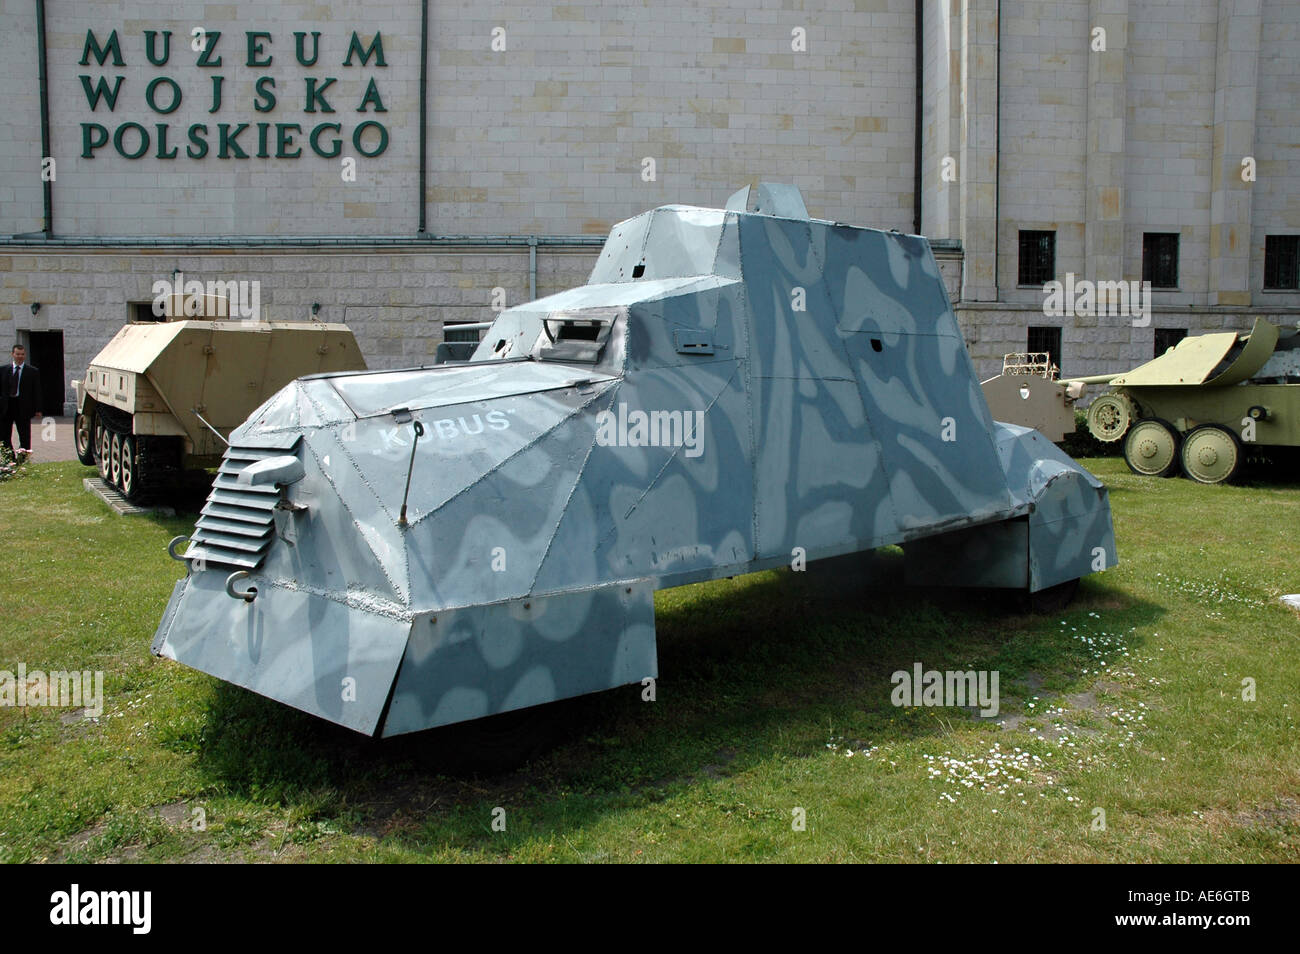 Polish armoured car from Warsaw upraising in 1994 called 'Kubus' Stock Photo